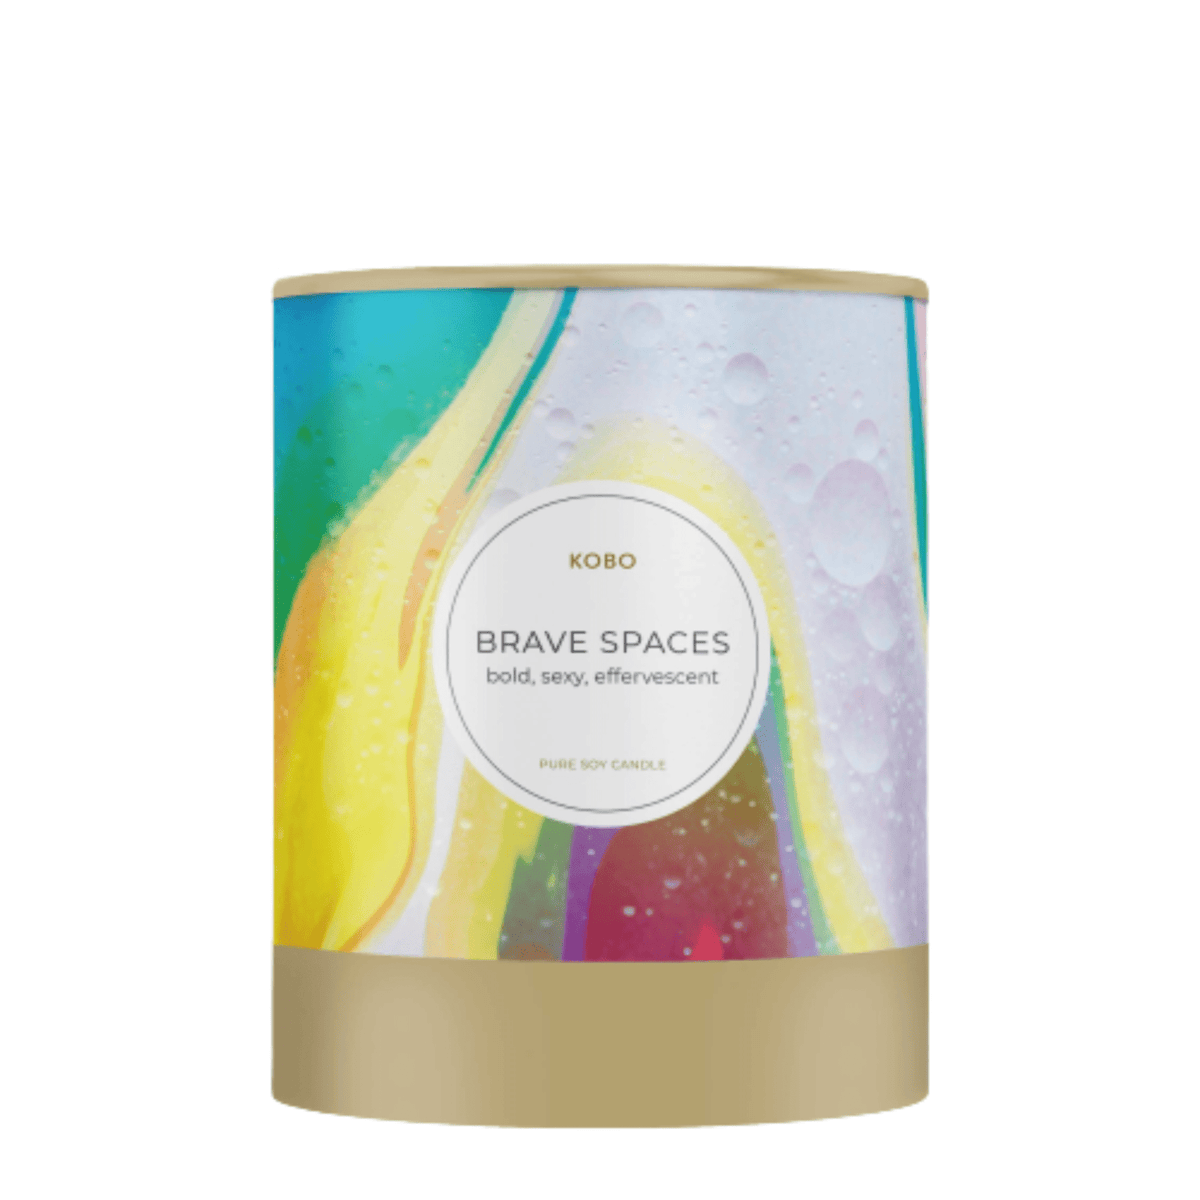 Primary Image of Brave Spaces Candle